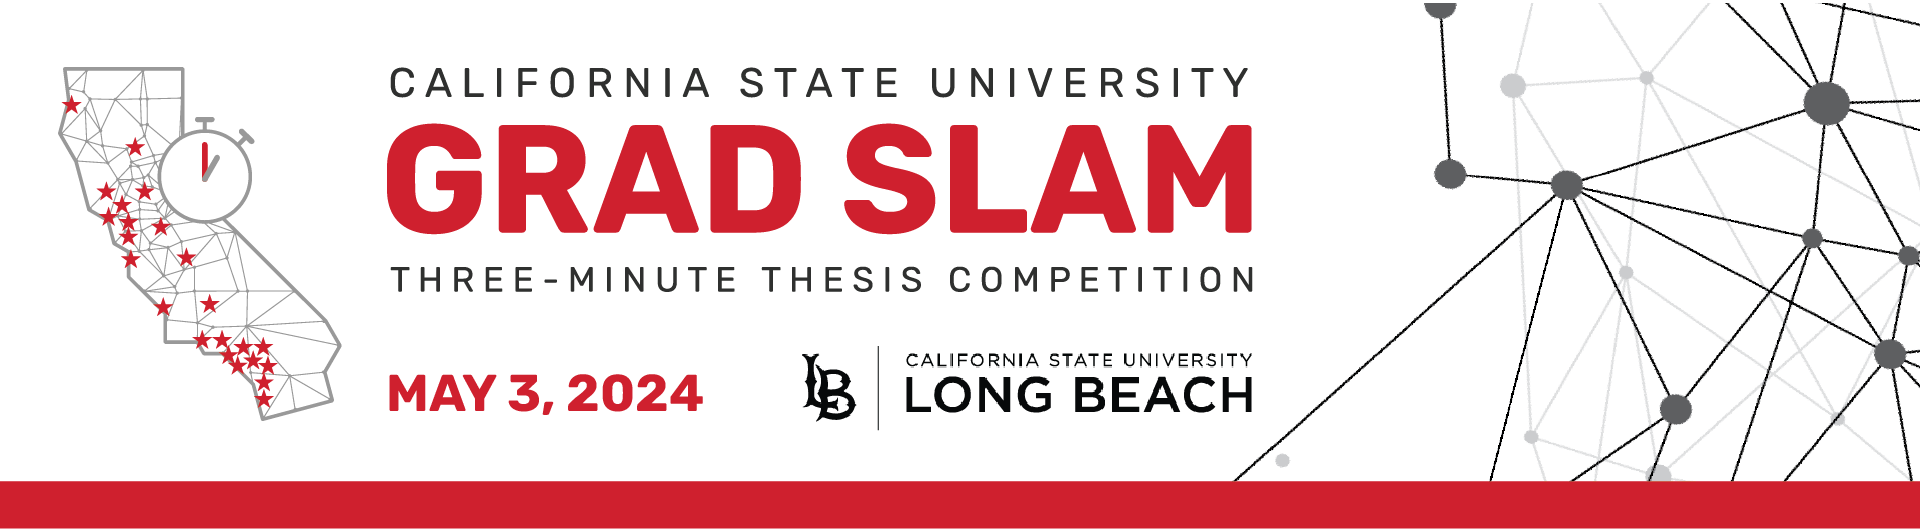 grad slam image with event information